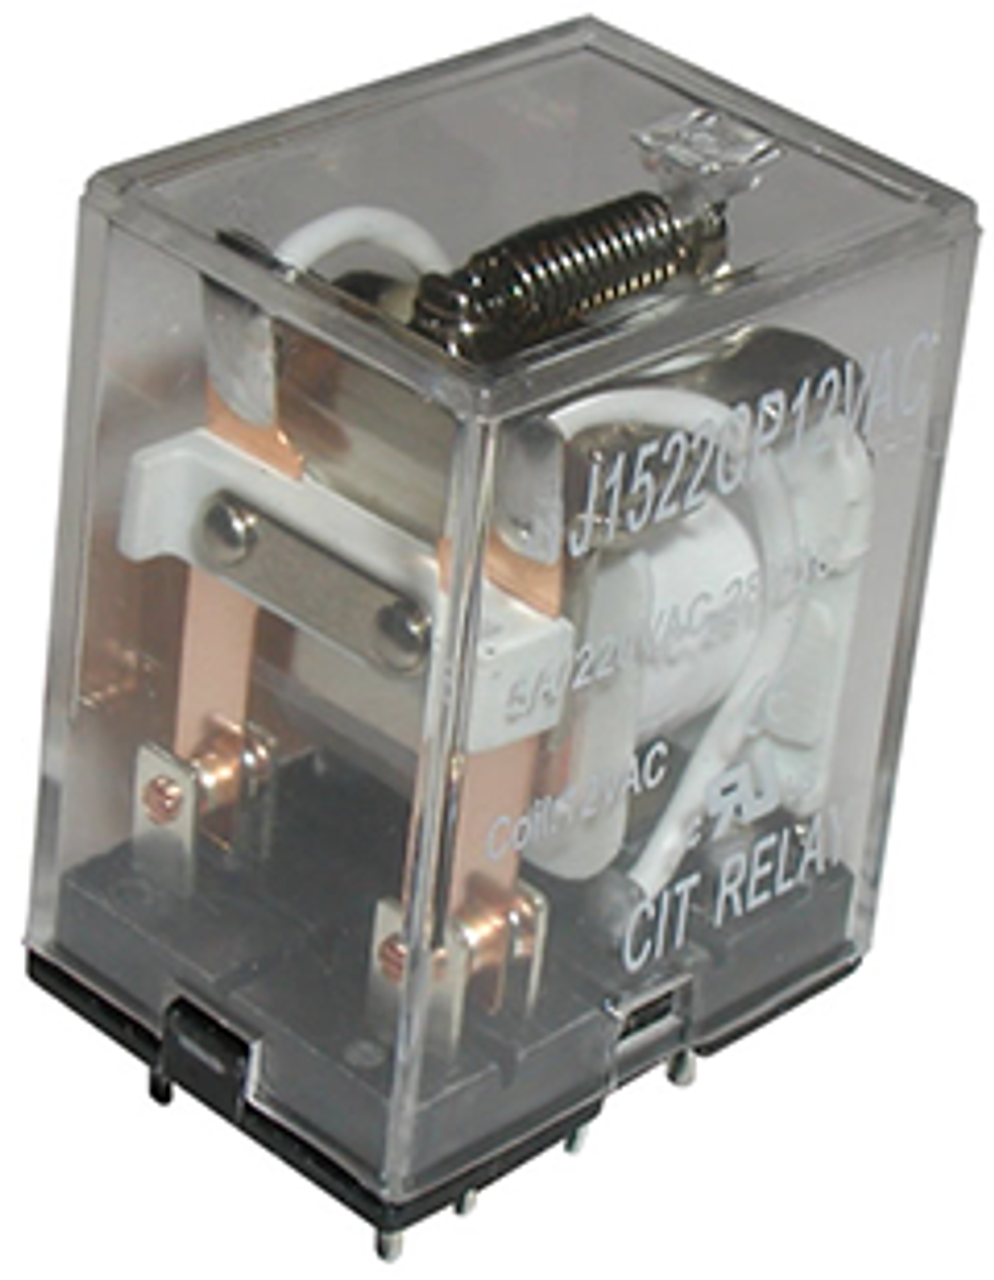 CIT Relay and Switch J1522CF24VDC Industrial Relays